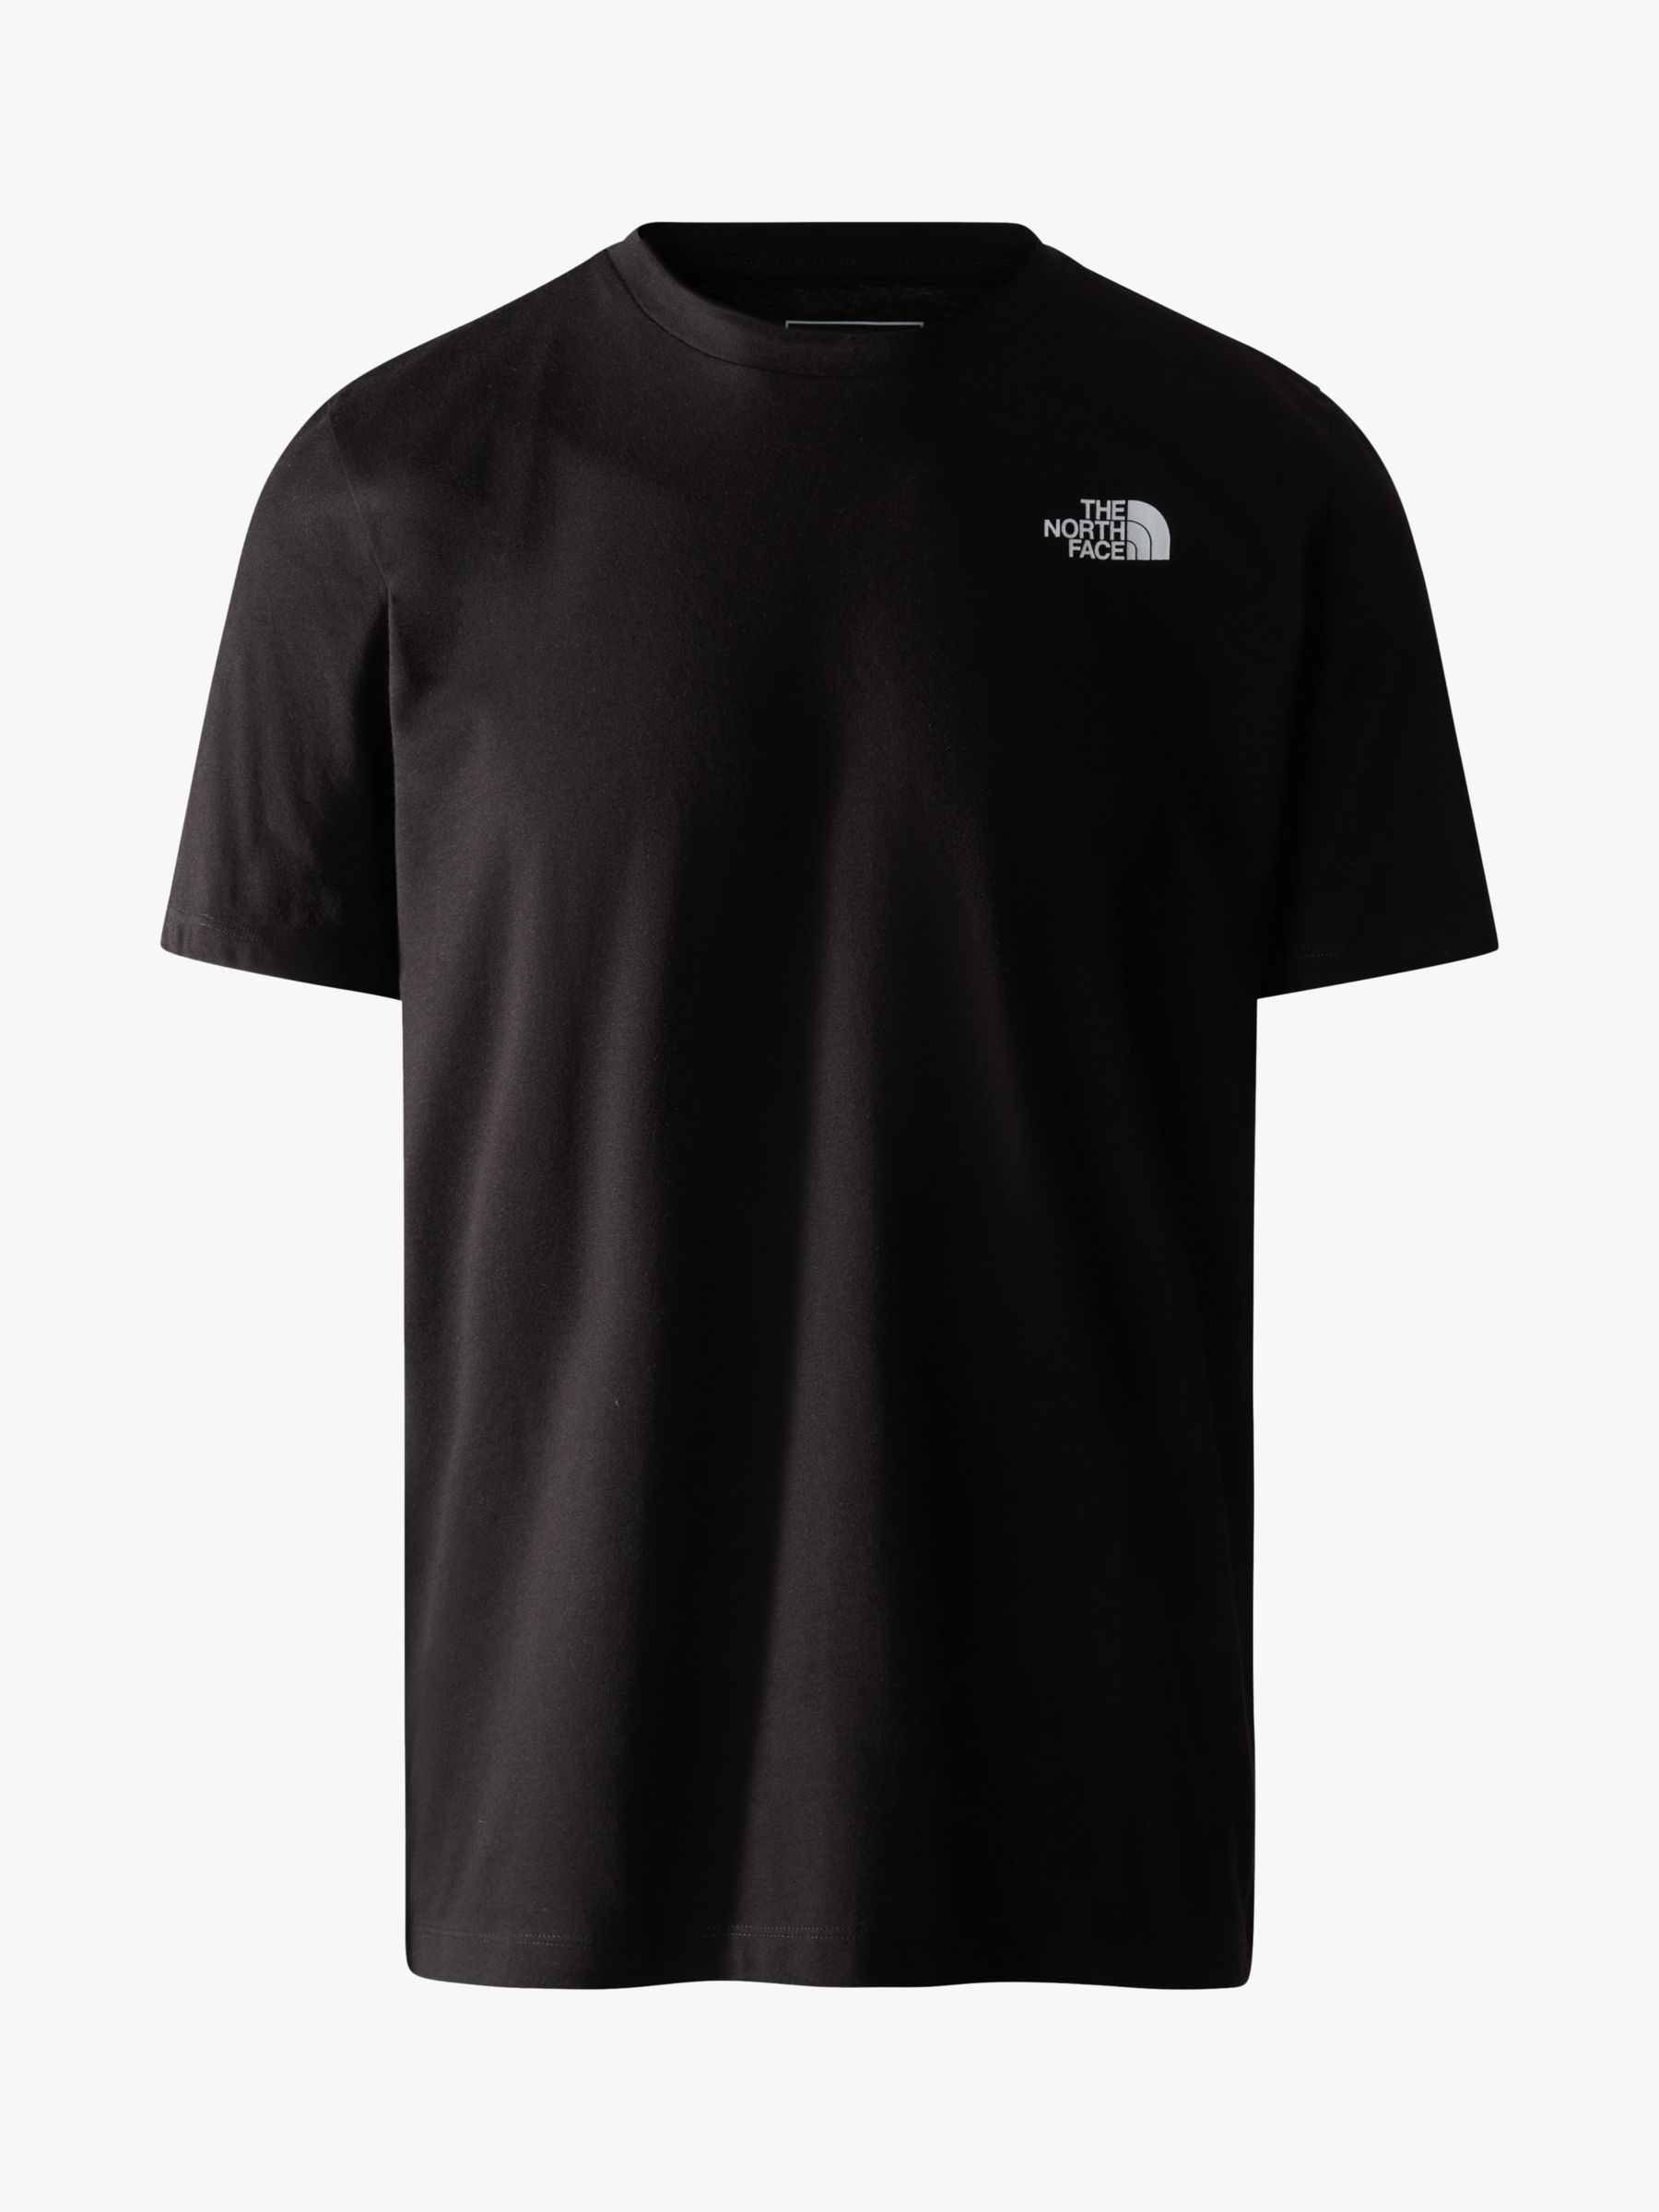 The North Face Foundation Graphic Short Sleeve T-shirt, Black/Multi at ...